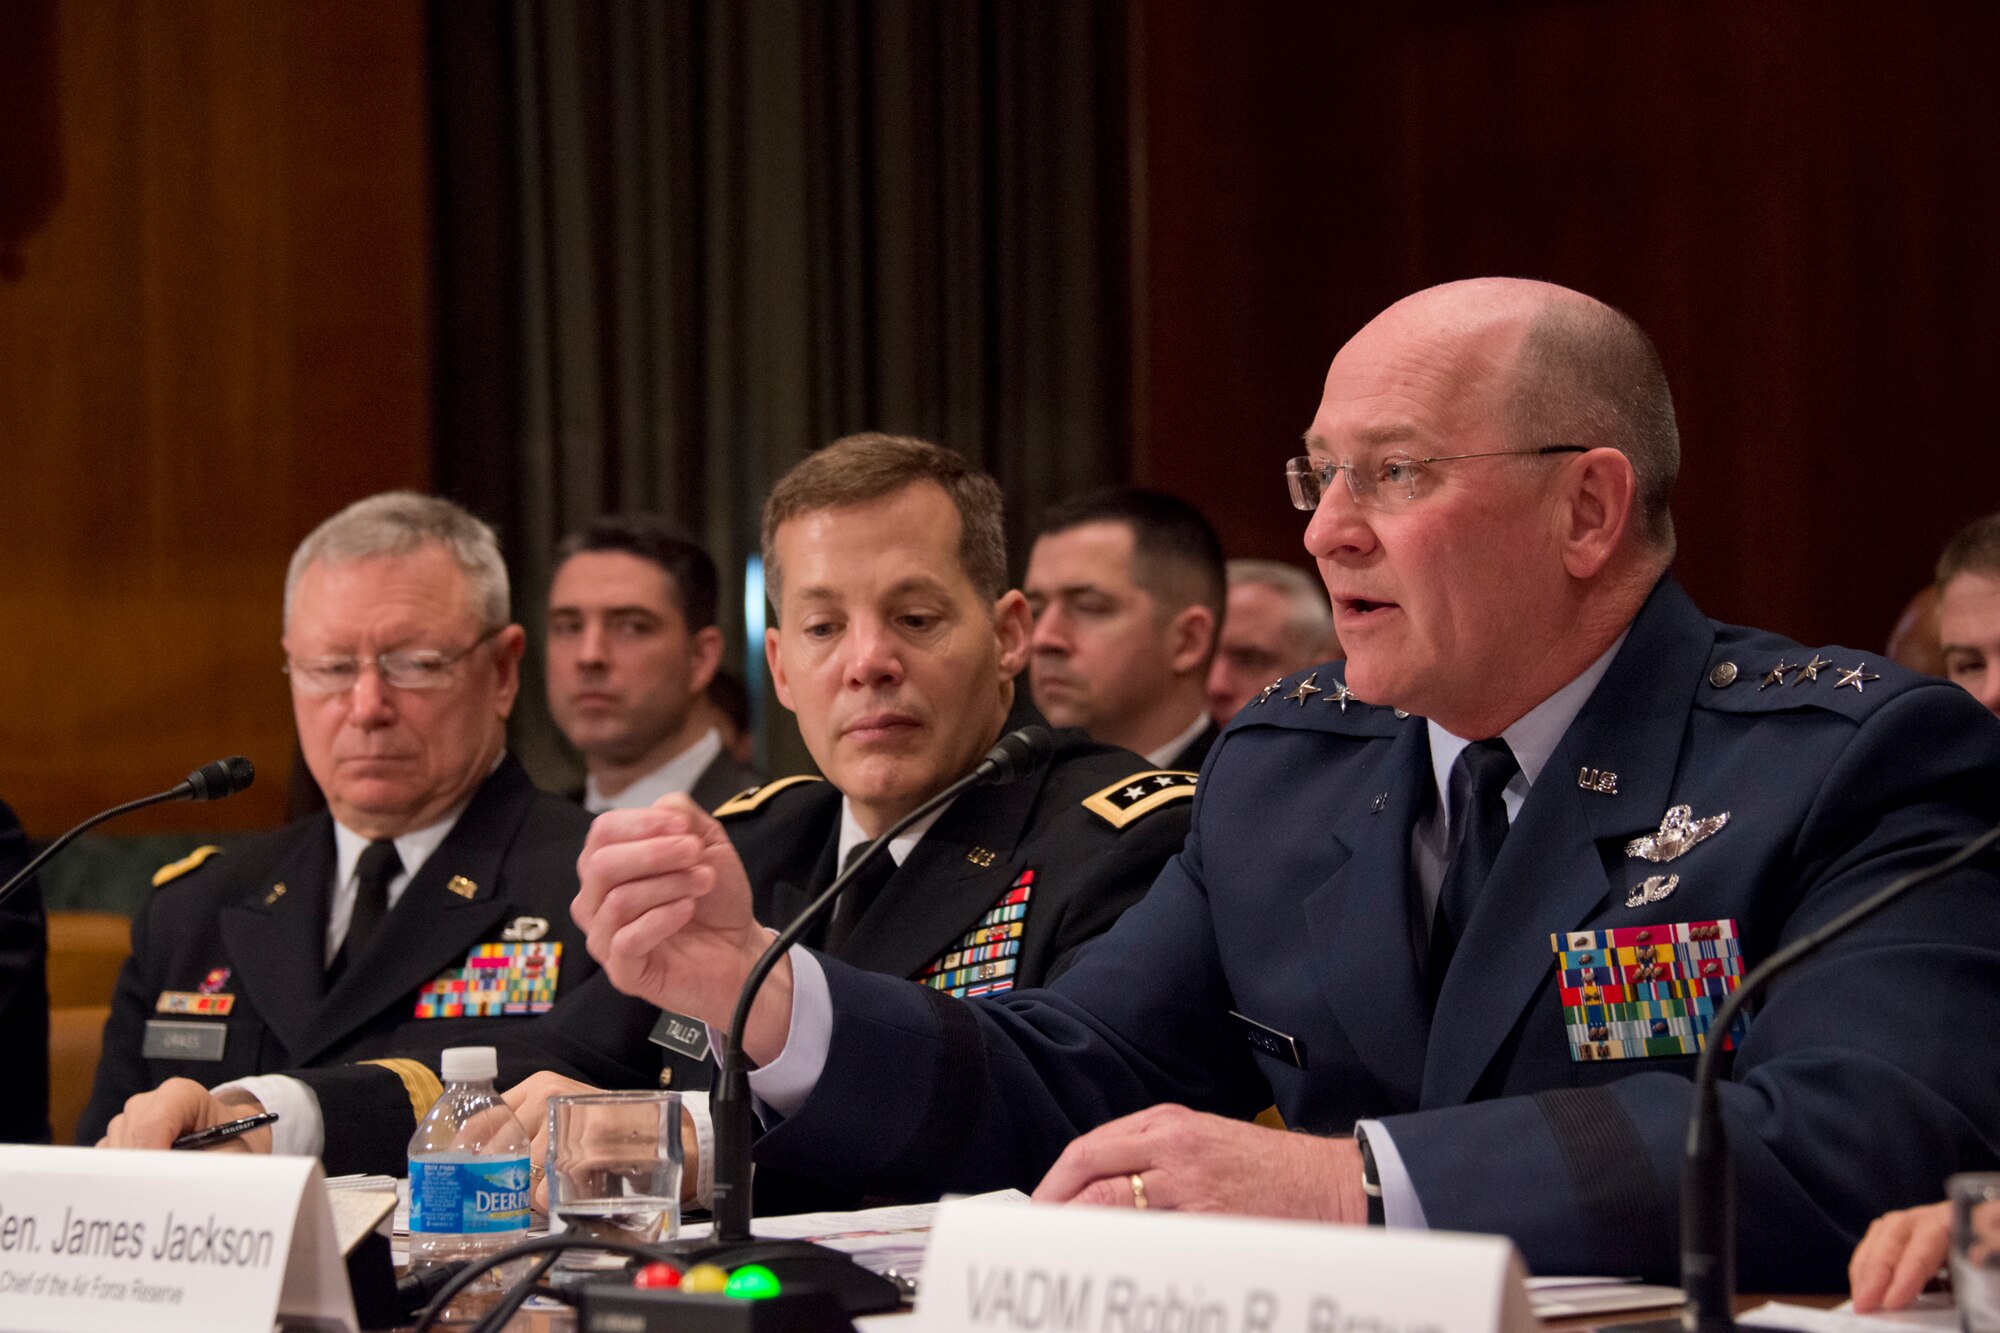 Lieutenant Gen. James F. Jackson, chief of Air Force Reserve and commander of Air Force Reserve Command, provides testimony before the Senate Appropriations Subcommittee at the Dirksen Senate Office Building, Washington D.C., March 16. The general addressed the Air Force Reserve posture for fiscal year 2017, to include challenges and solutions facing missions, manpower, modernization and military construction.